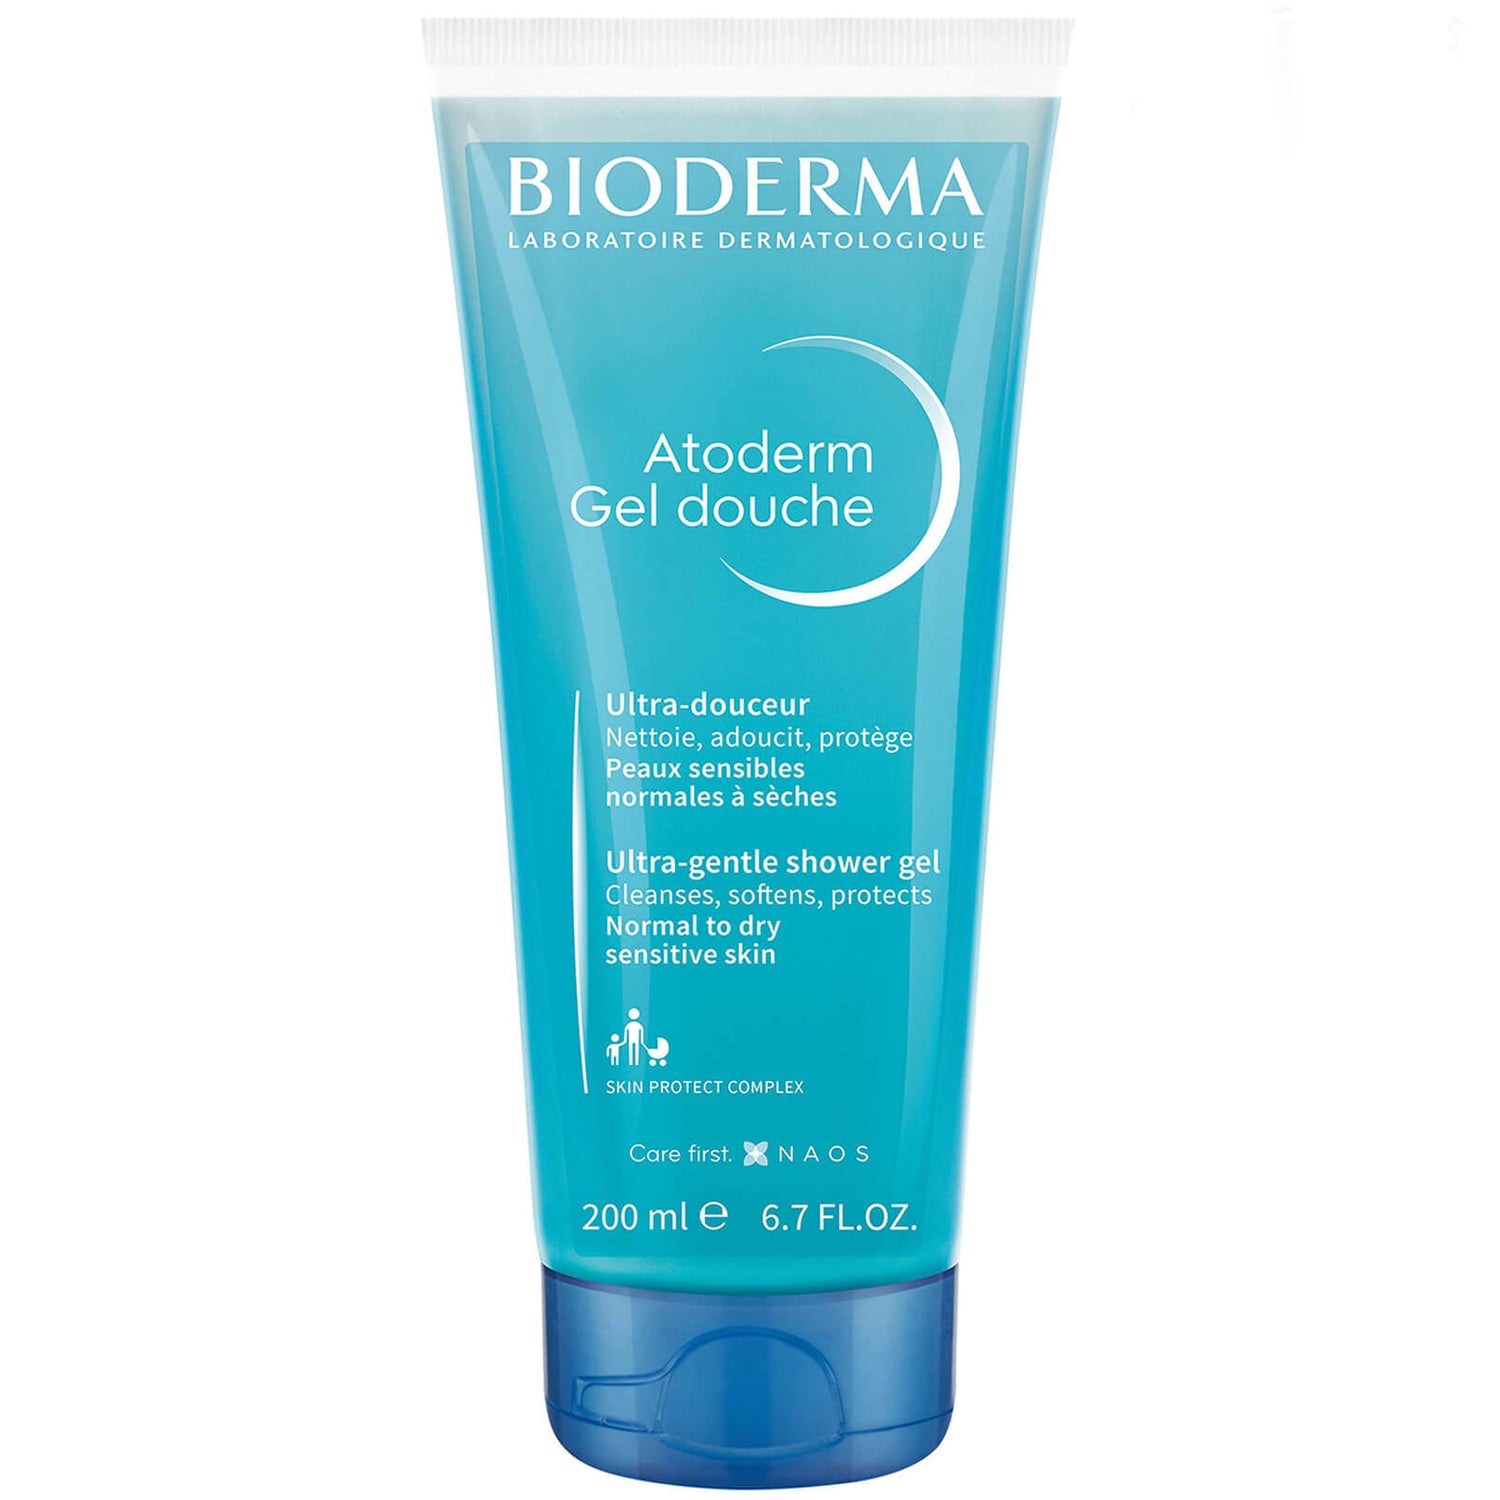 Bioderma Atoderm face and body shower gel 200ML